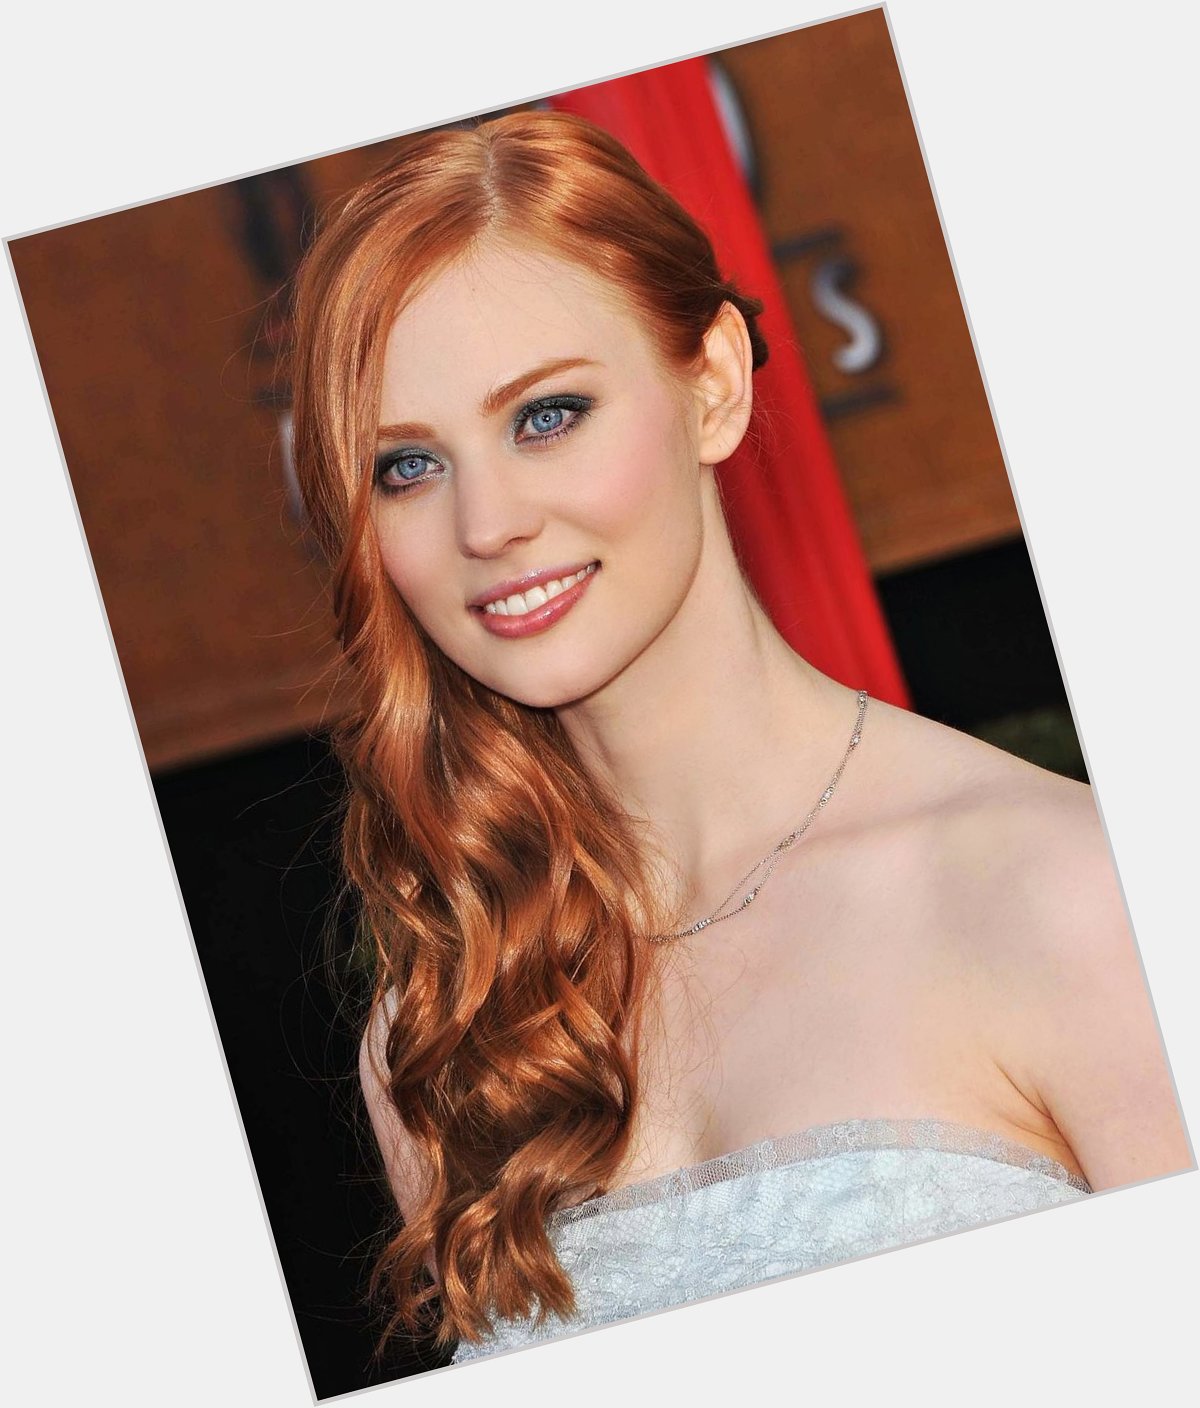 Happy Birthday to ...  Actress - Deborah Ann Woll Who is 38yo today!
2010 below 